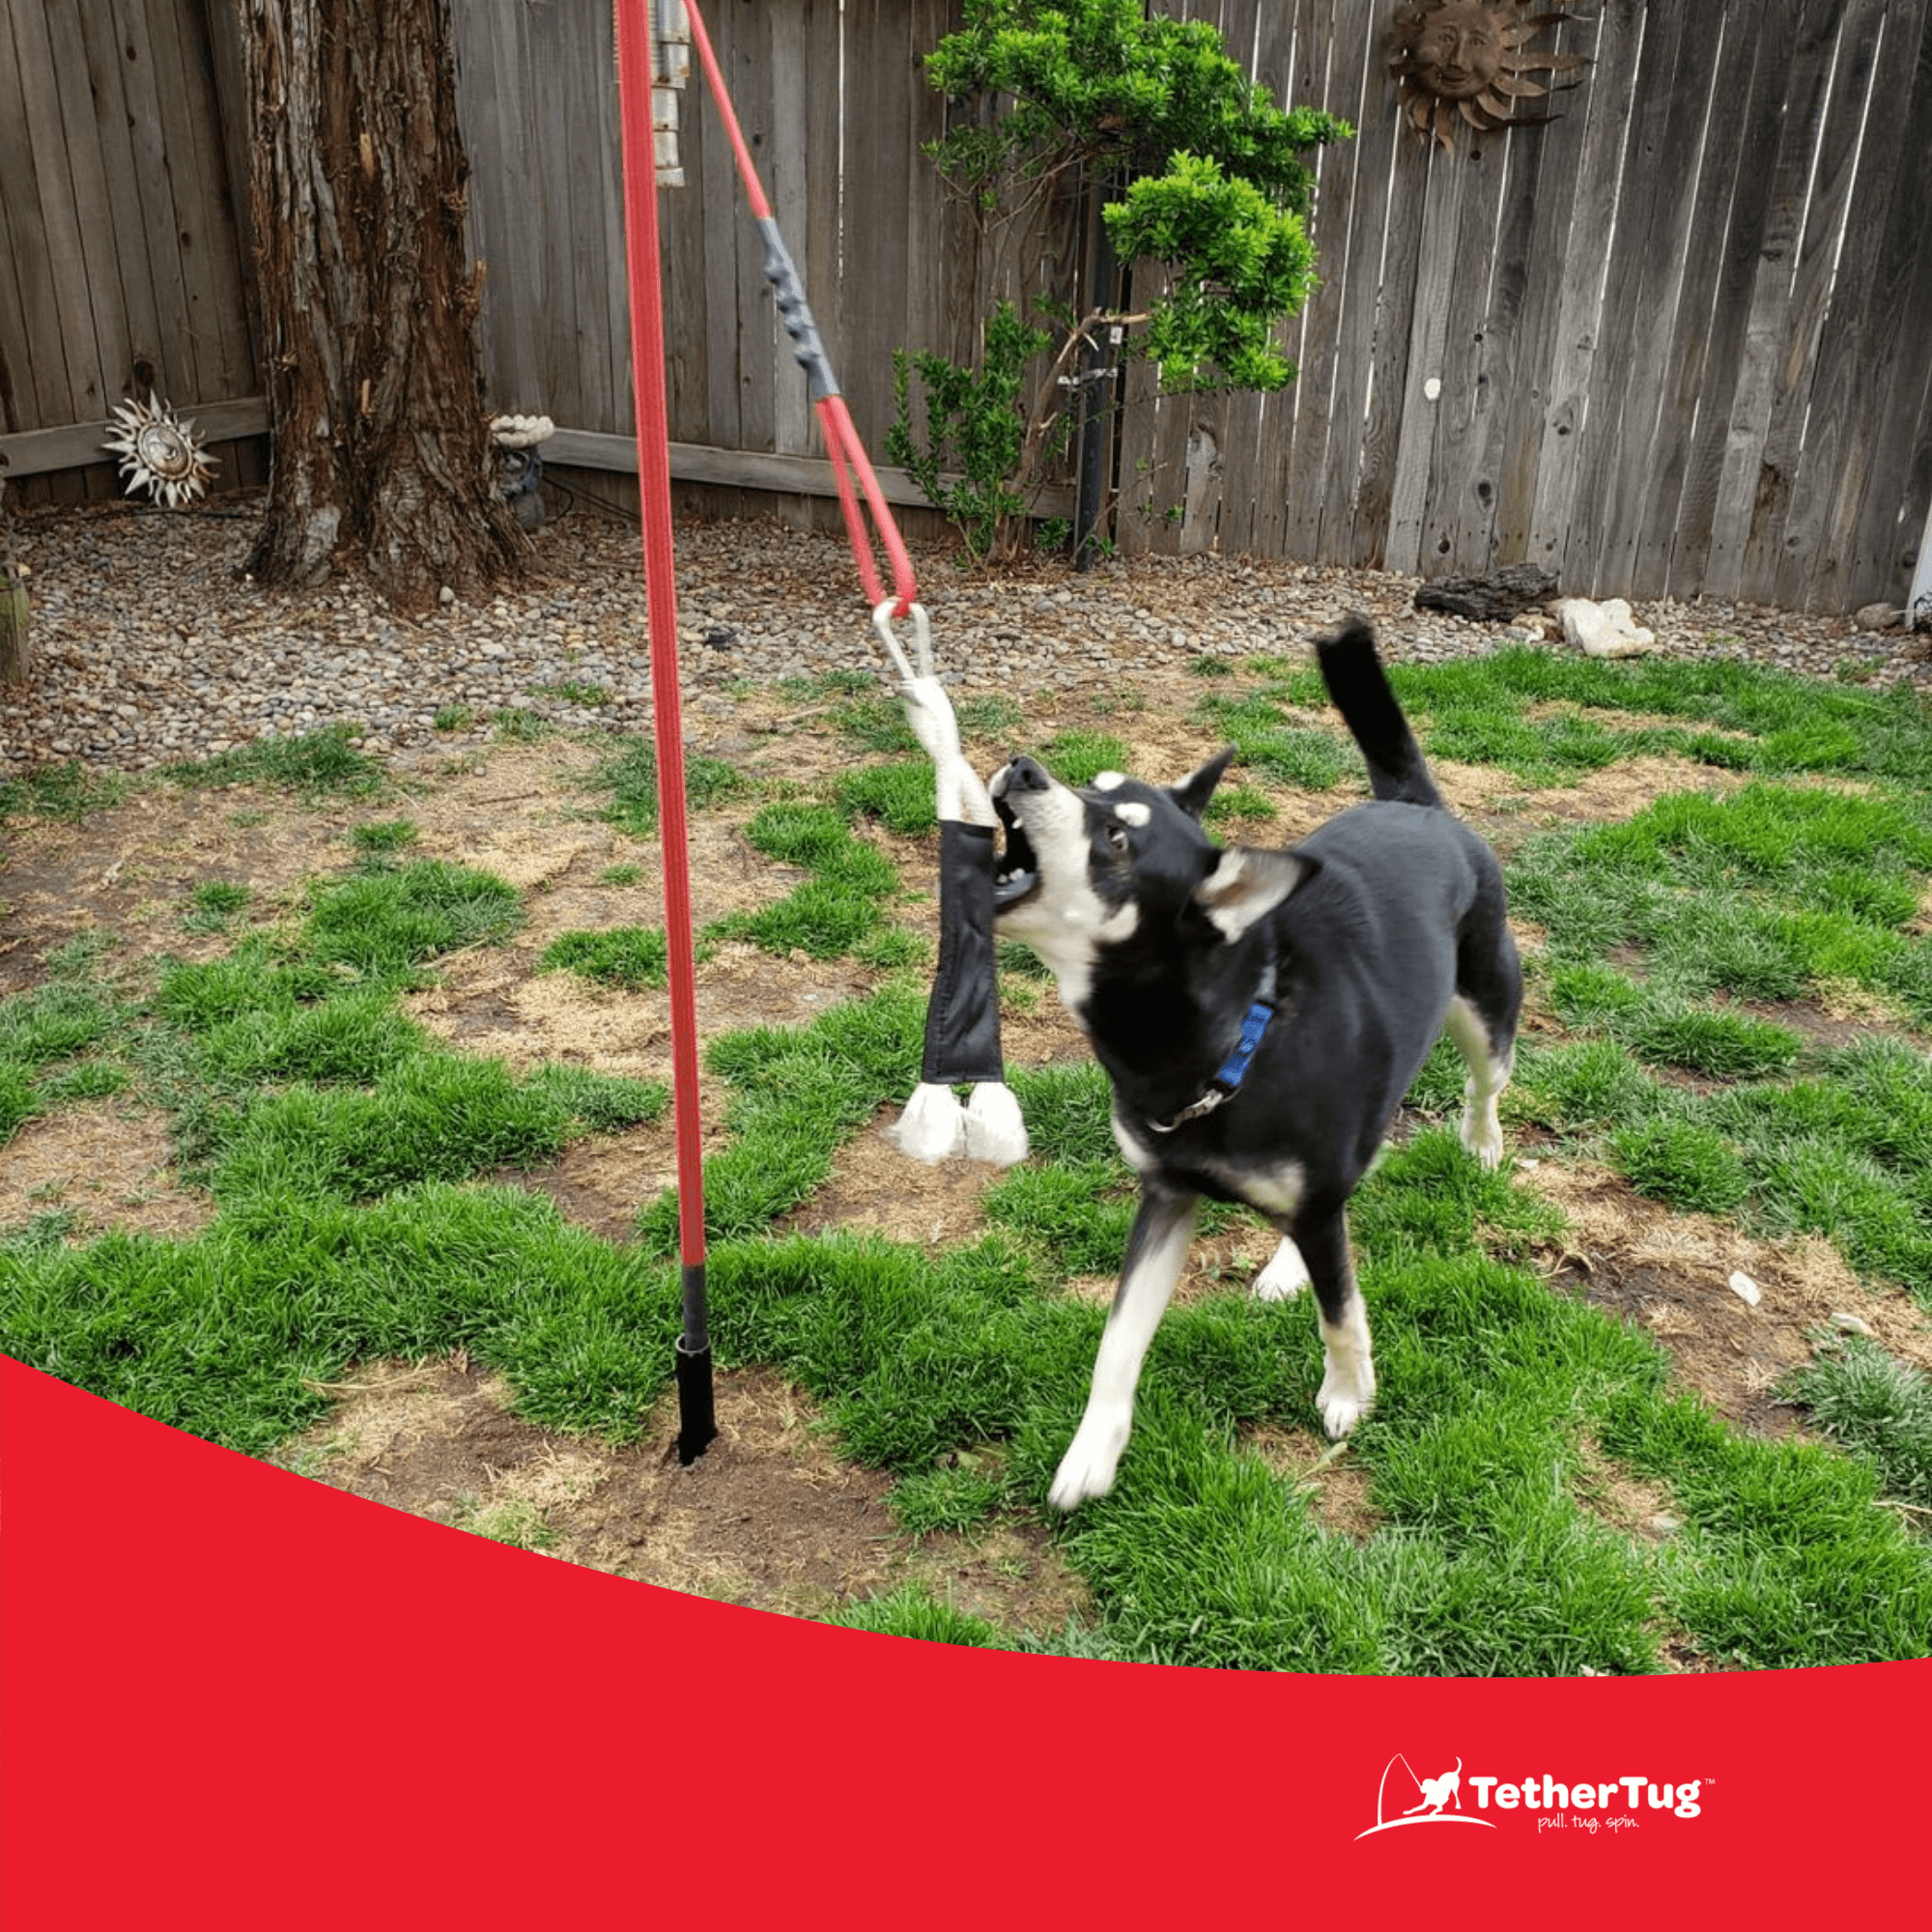 Kelbuna tether tug outdoor dog toy, spring pole for dogs. Great